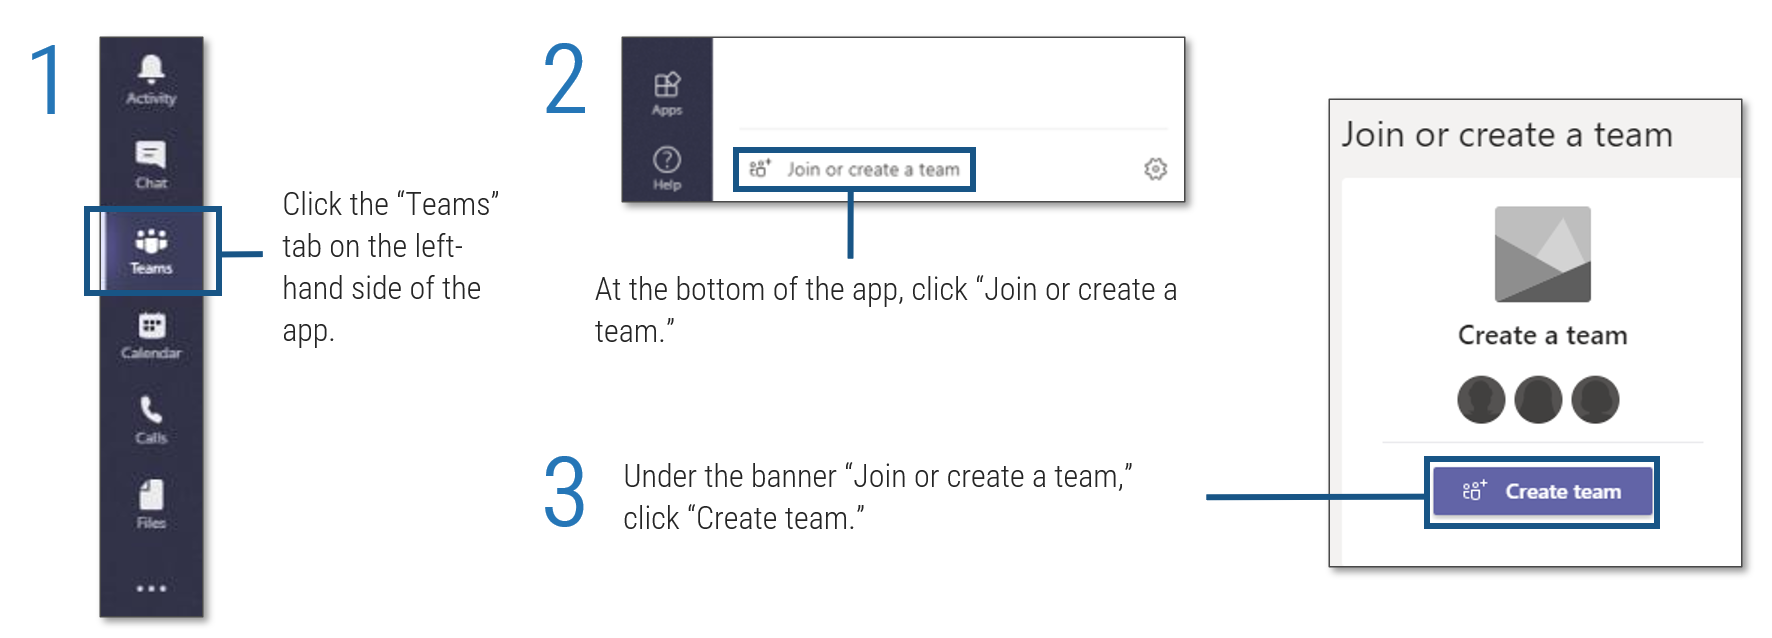 Screenshots detailing how to create a new team in Microsoft Teams, steps 1 to 3. Step 1: 'Click the <Teams data-verified=